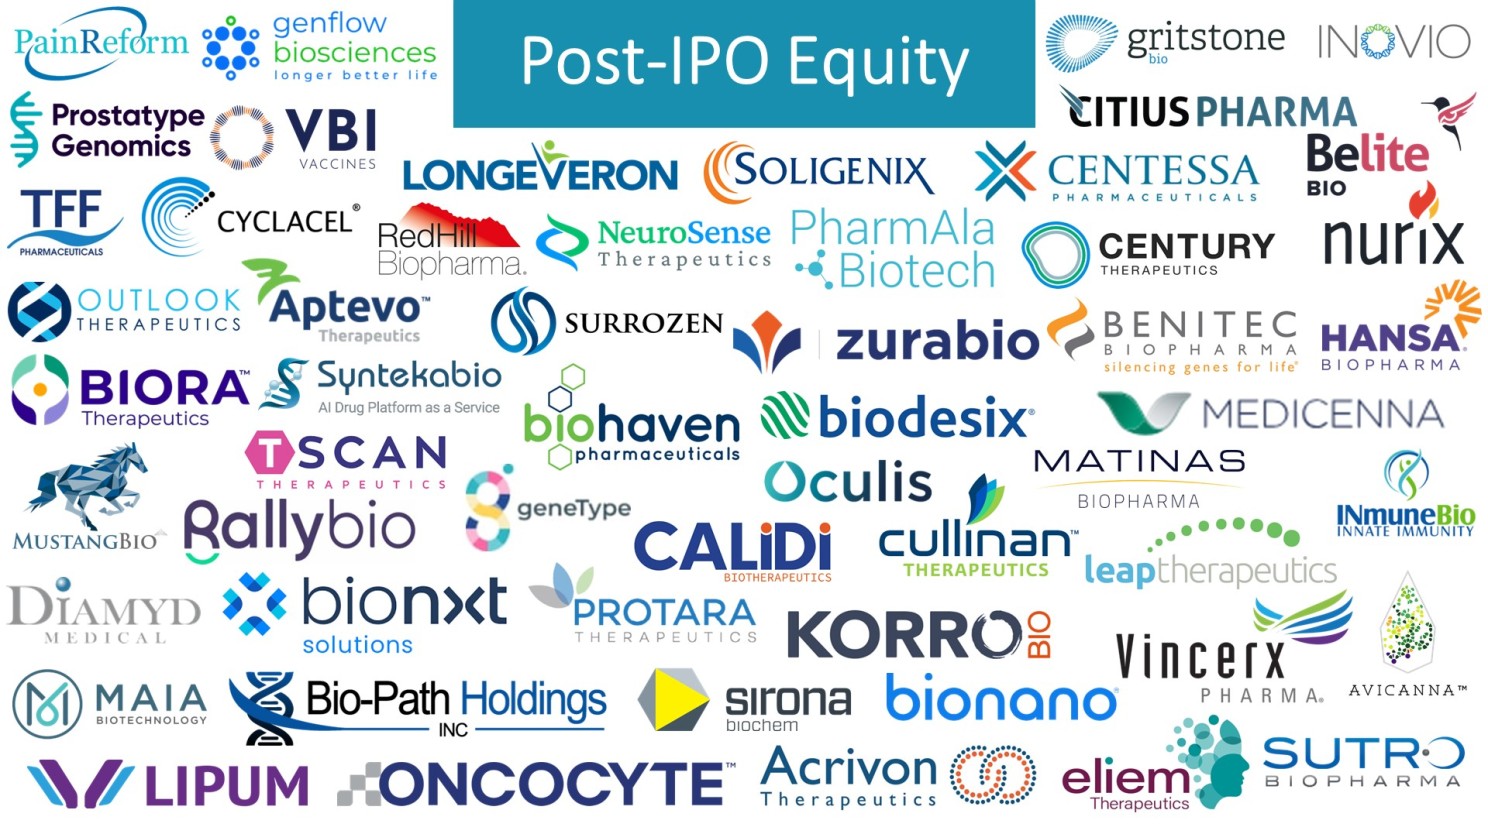 companies with post-ipo equity